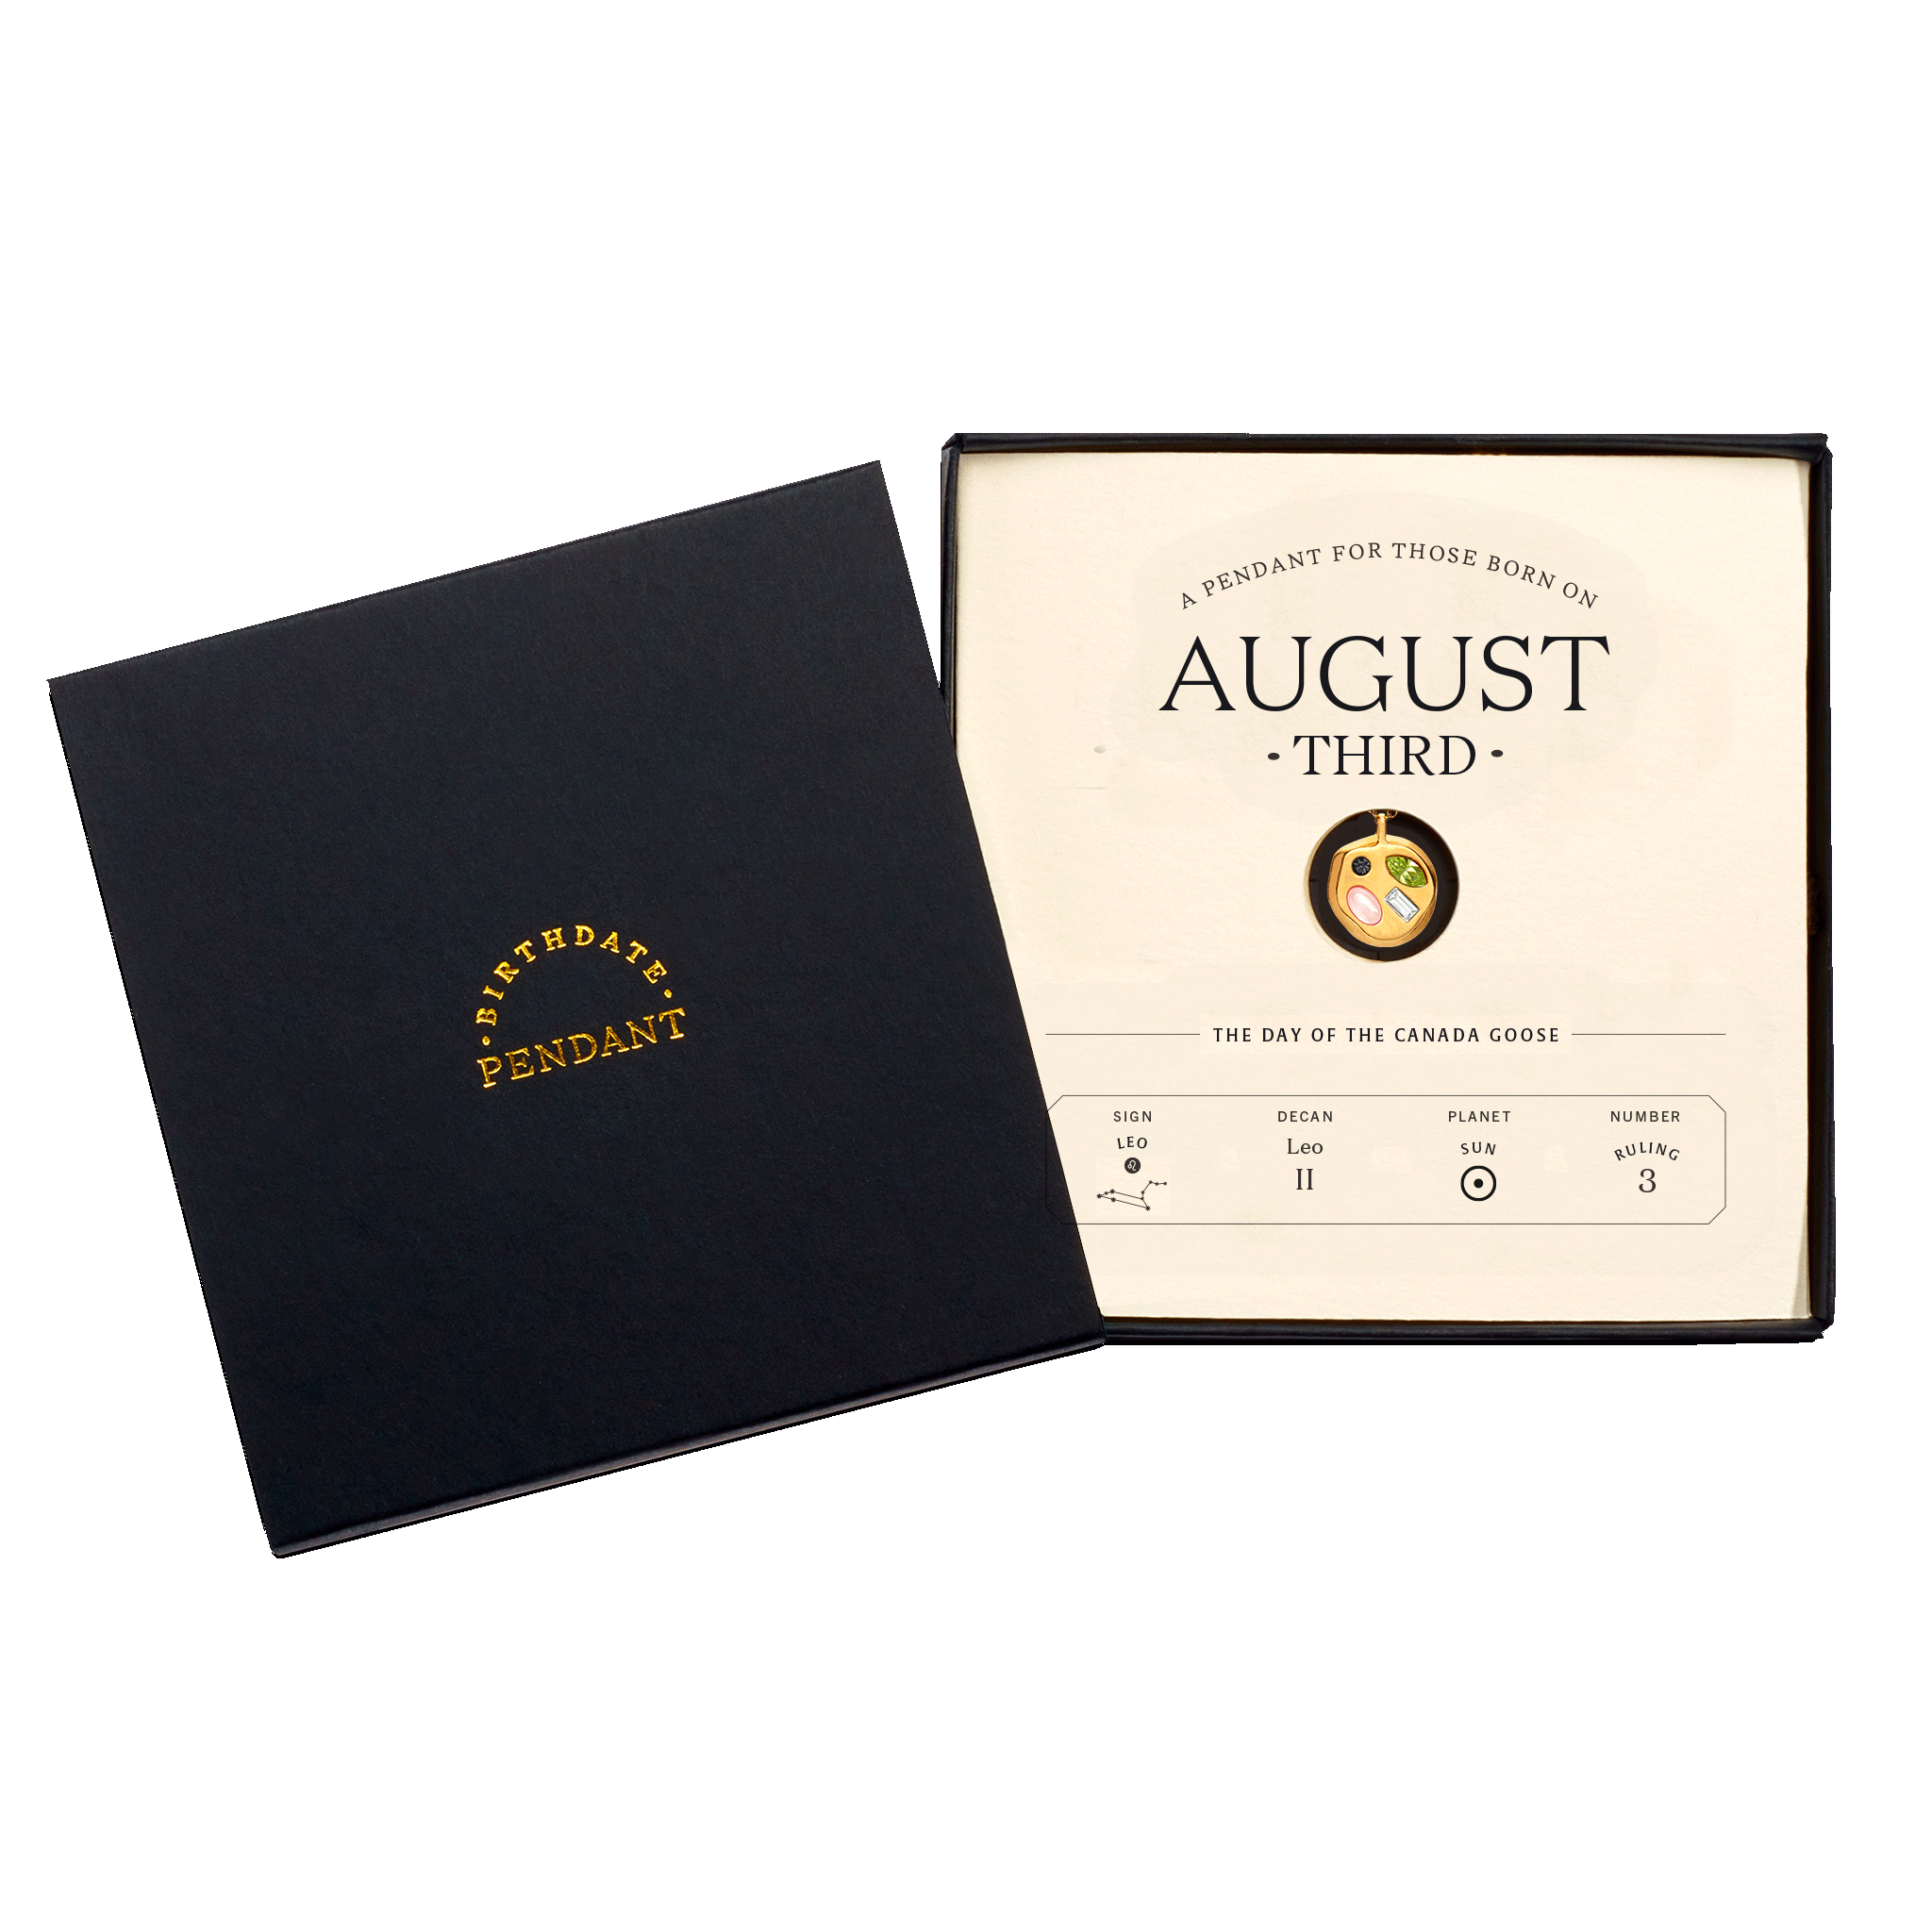 The August Third Pendant inside its box